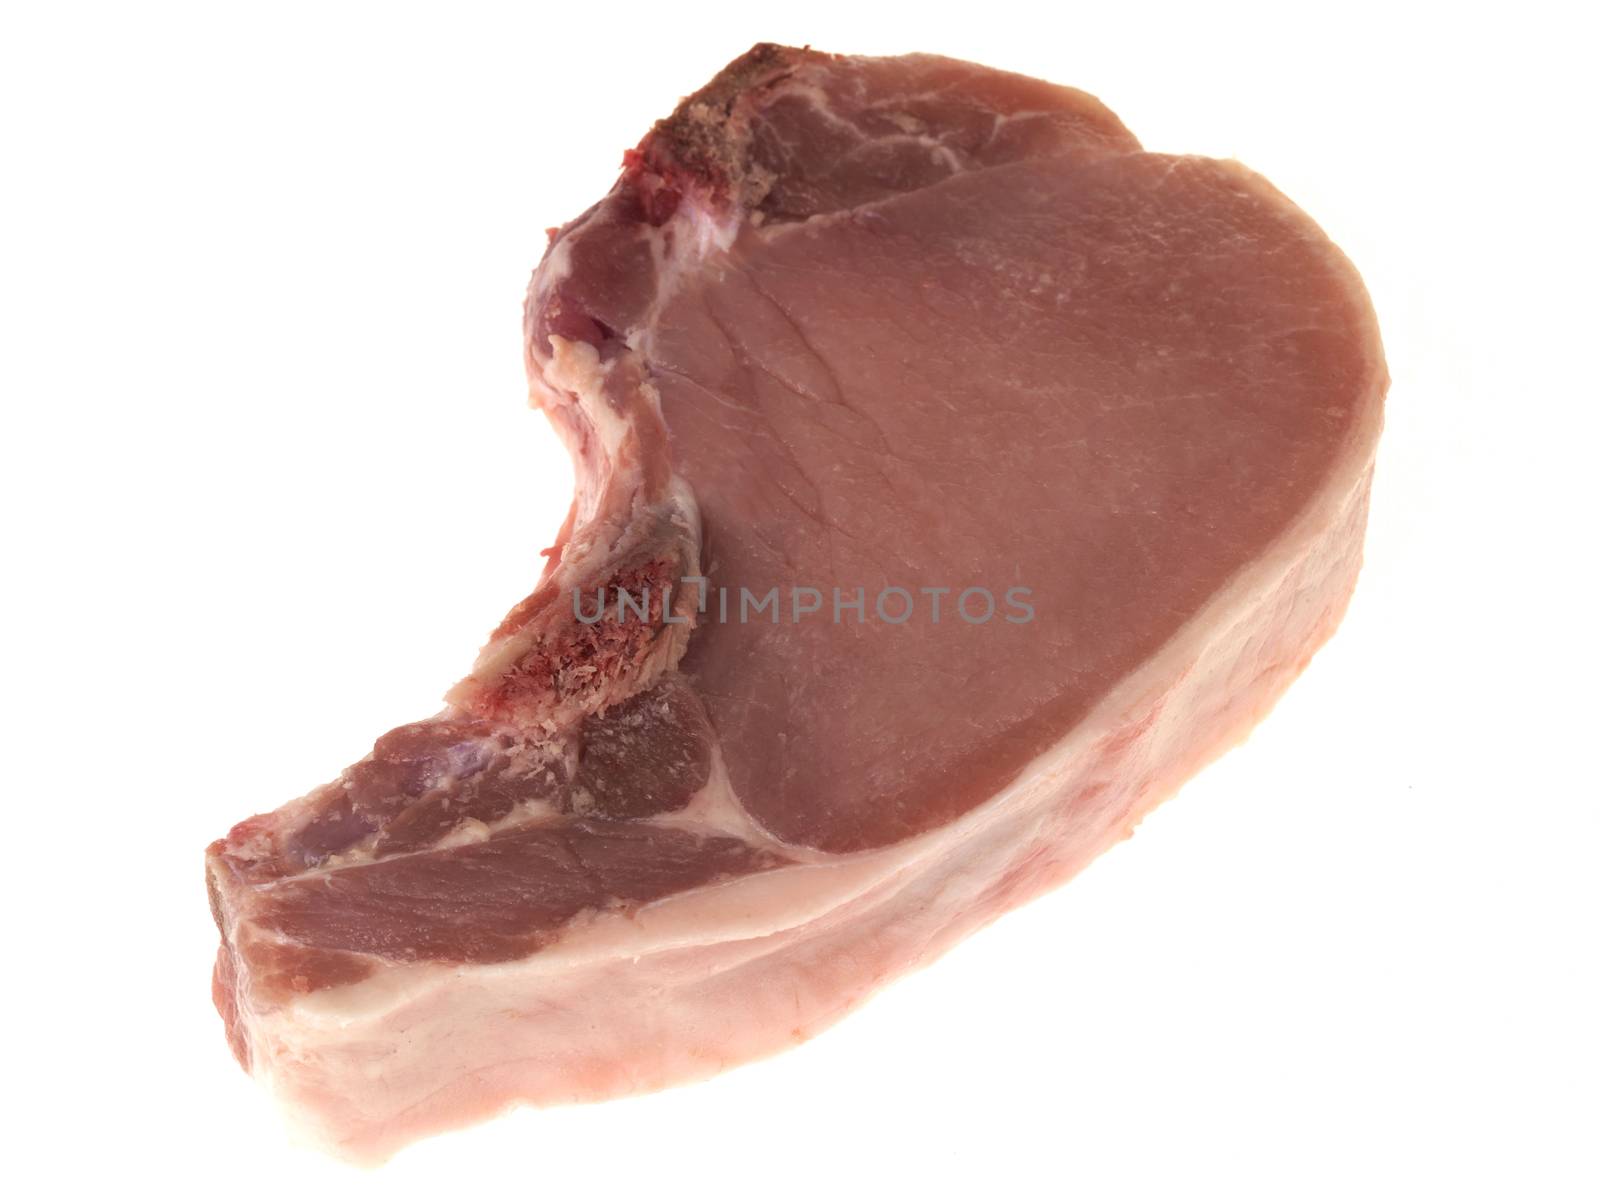 Raw Uncooked Pork Chop Meat Isolated White Backgorund